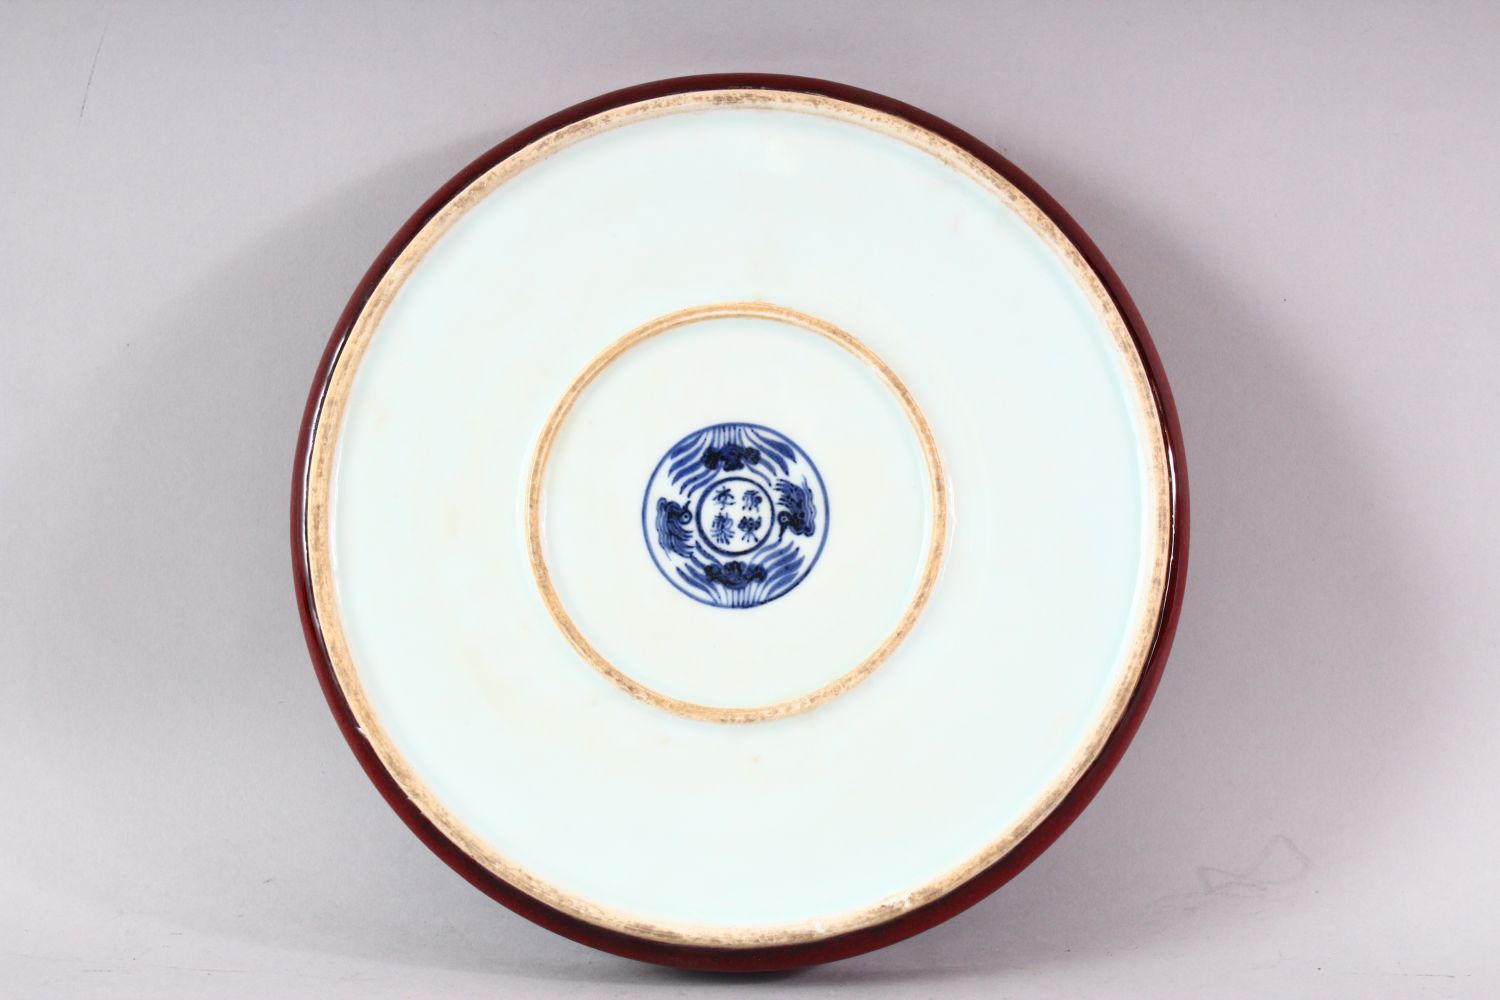 A MING STYLE COPPER RED CIRCULAR PORCELAIN DISH, the central blue and white panel painted with lotus - Image 4 of 5